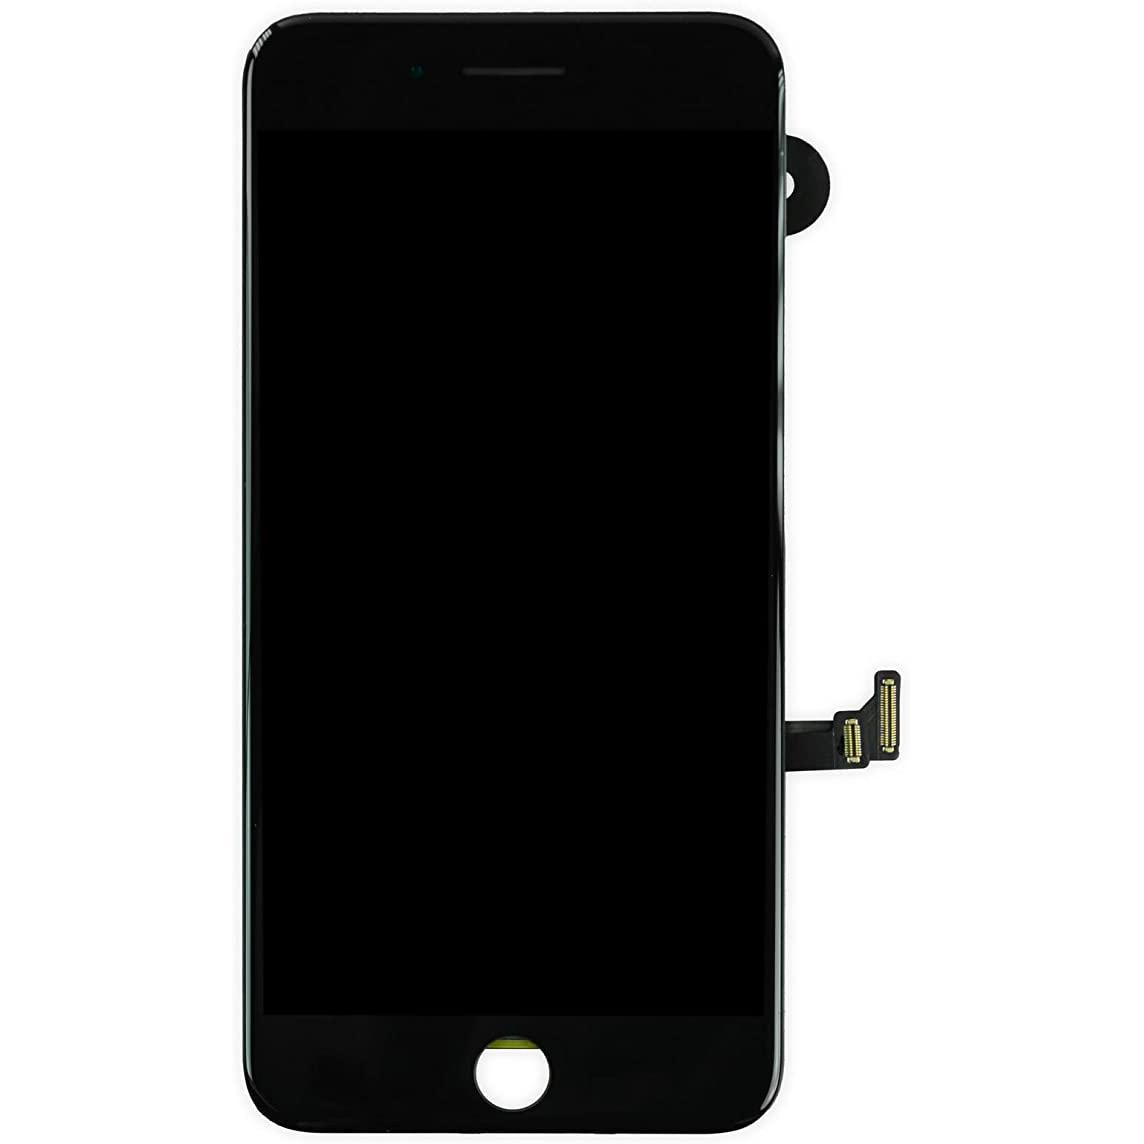 Apple iphone 7 plus LCD Wholesale Suppliers